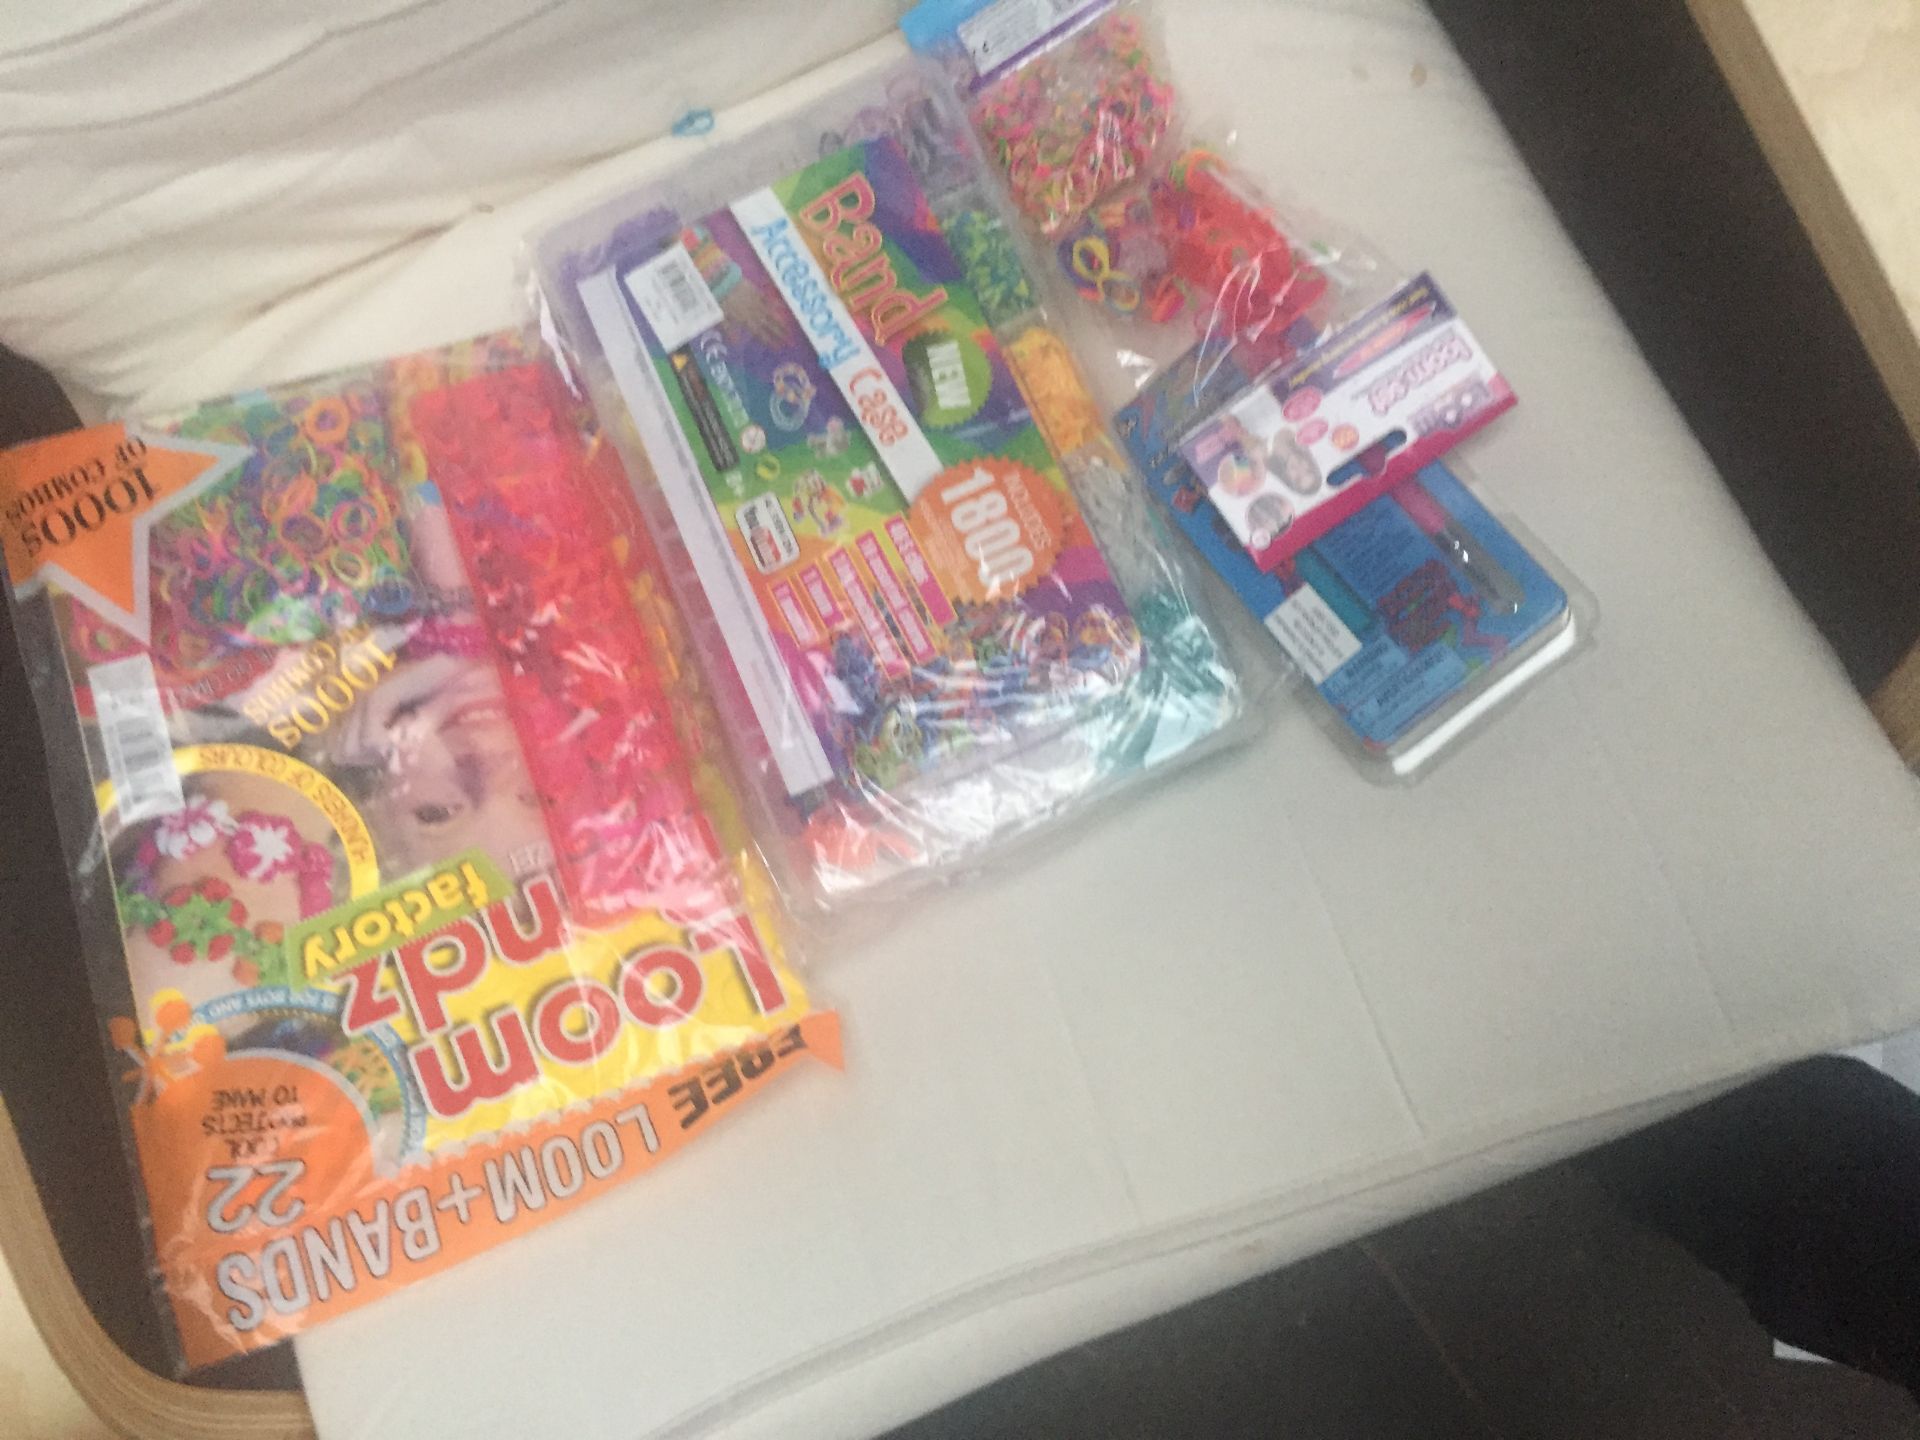 Job Lot Of Loom Bands - BRAND NEW Boxed, Large Box with Lots of Brand New Loom Bands & - Image 3 of 3